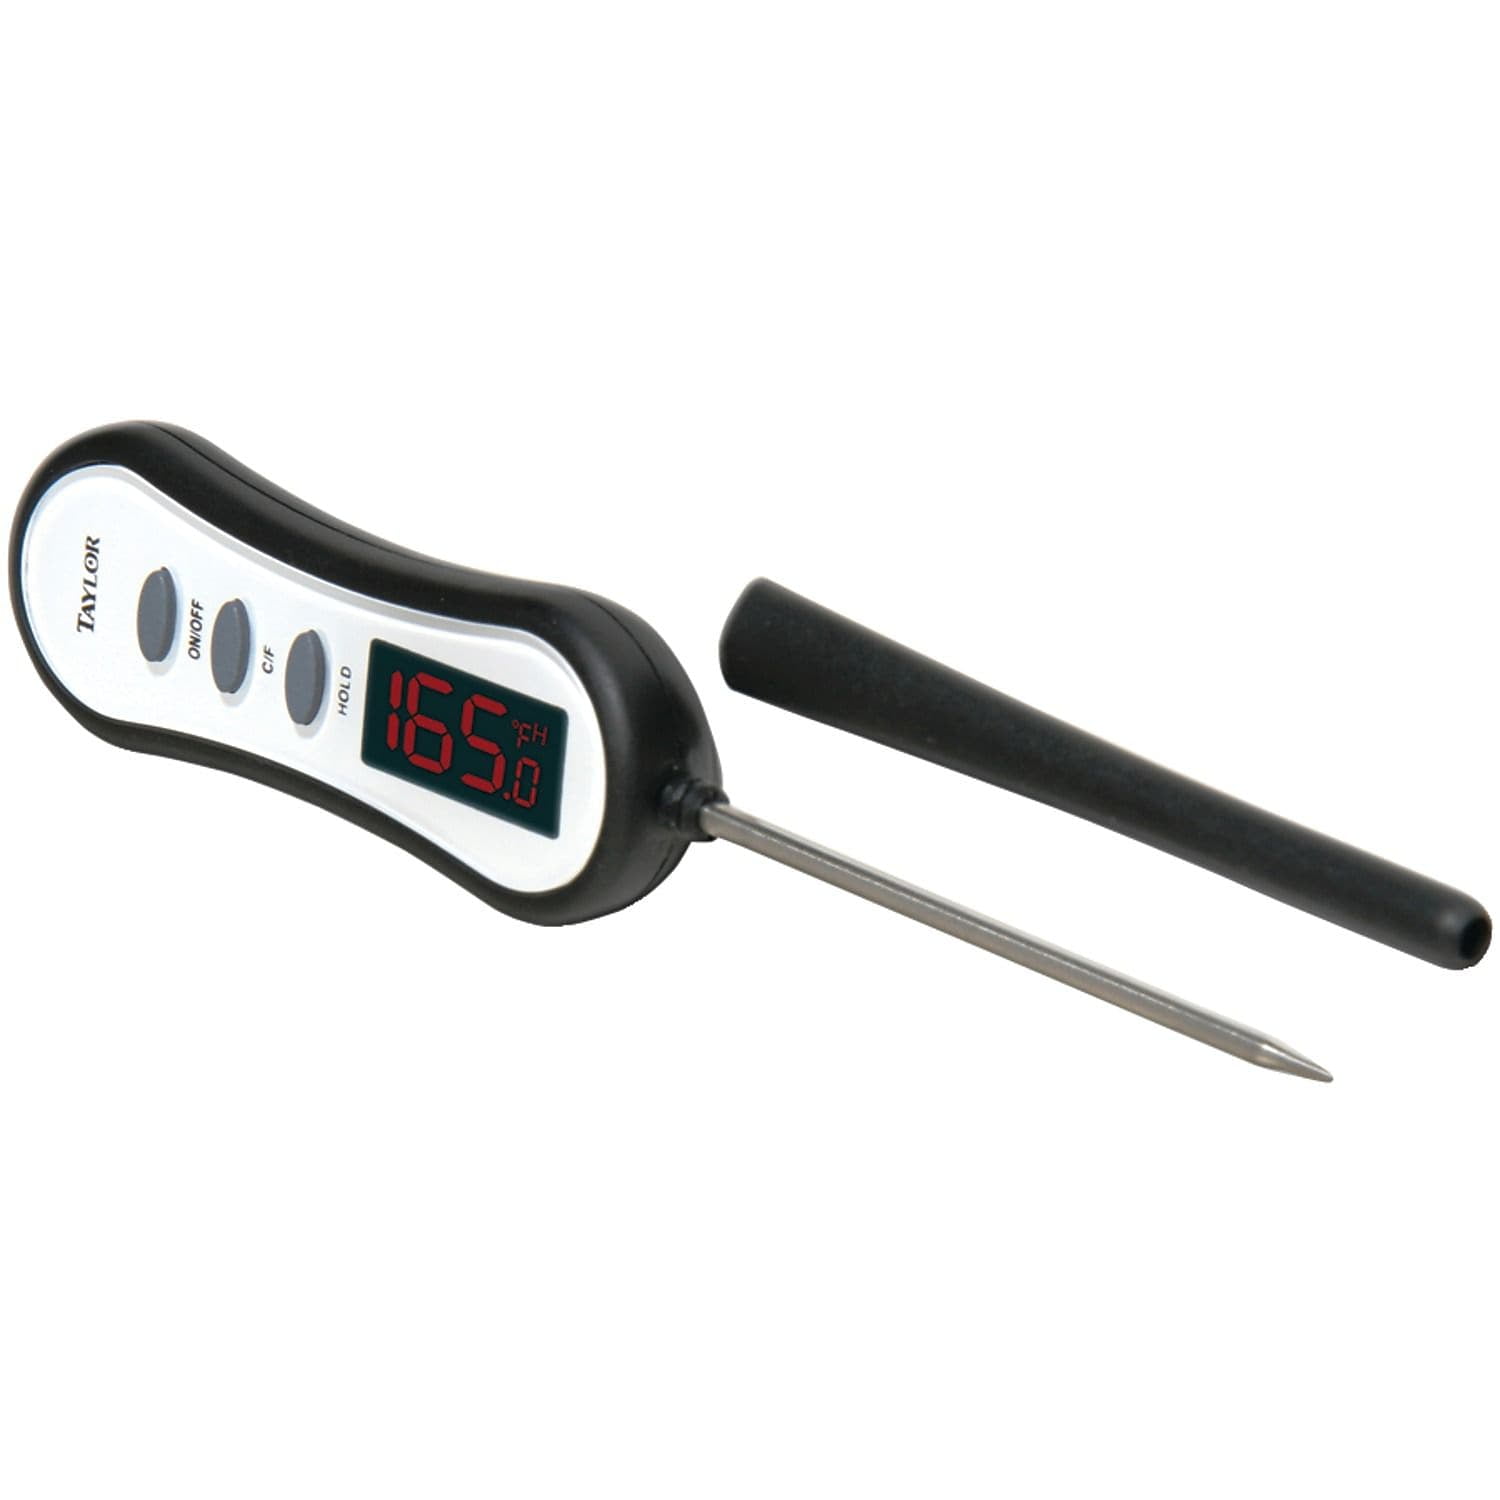 Taylor 3516 Digital Instant Read Thermometer Tap3516 Kitchen Thermometers for sale online 